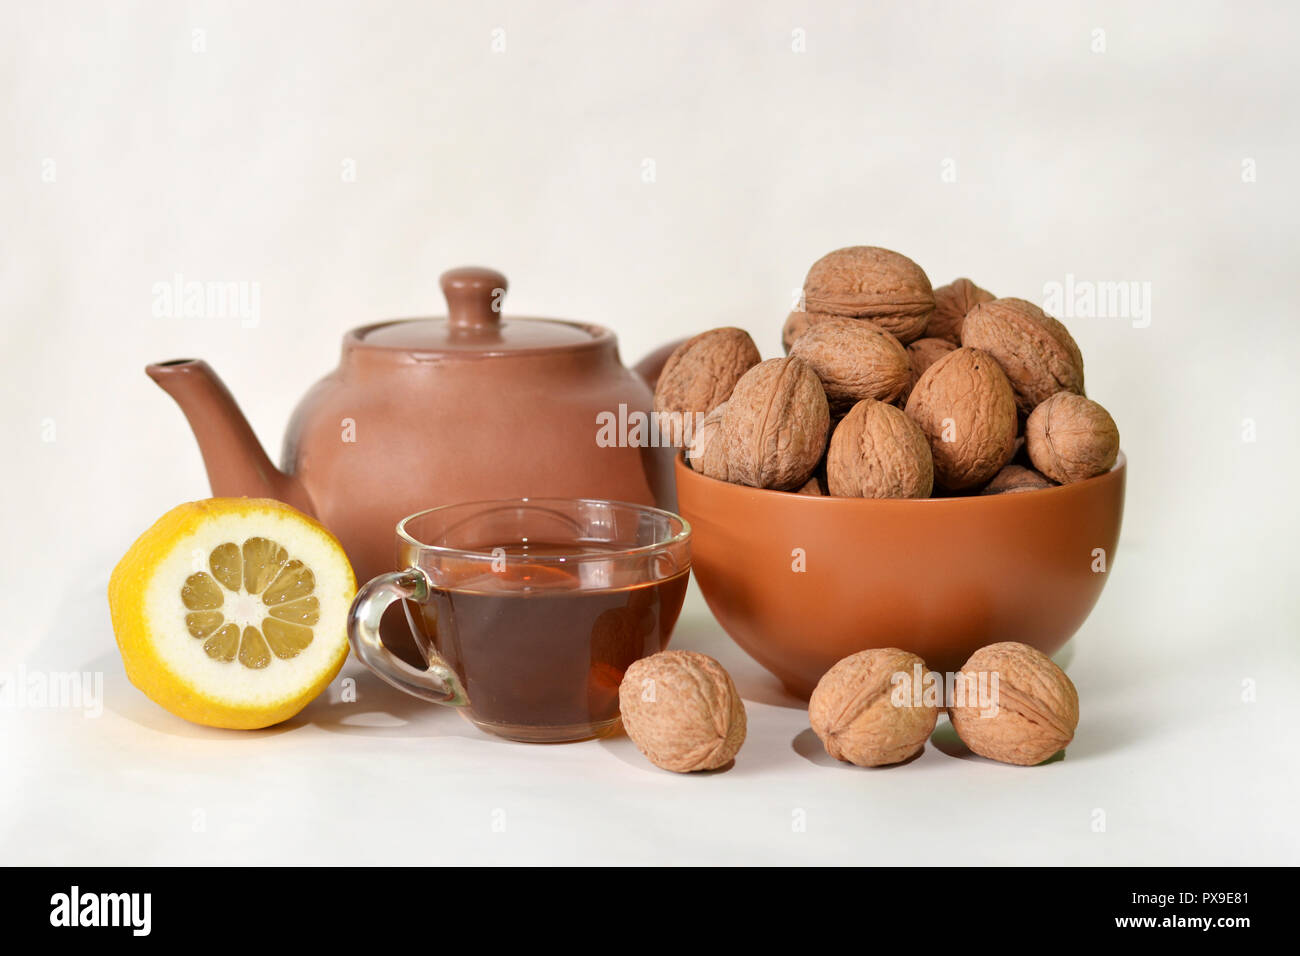 A Cup of tea, a kettle, a lemon and a bowl of nuts. Stock Photo